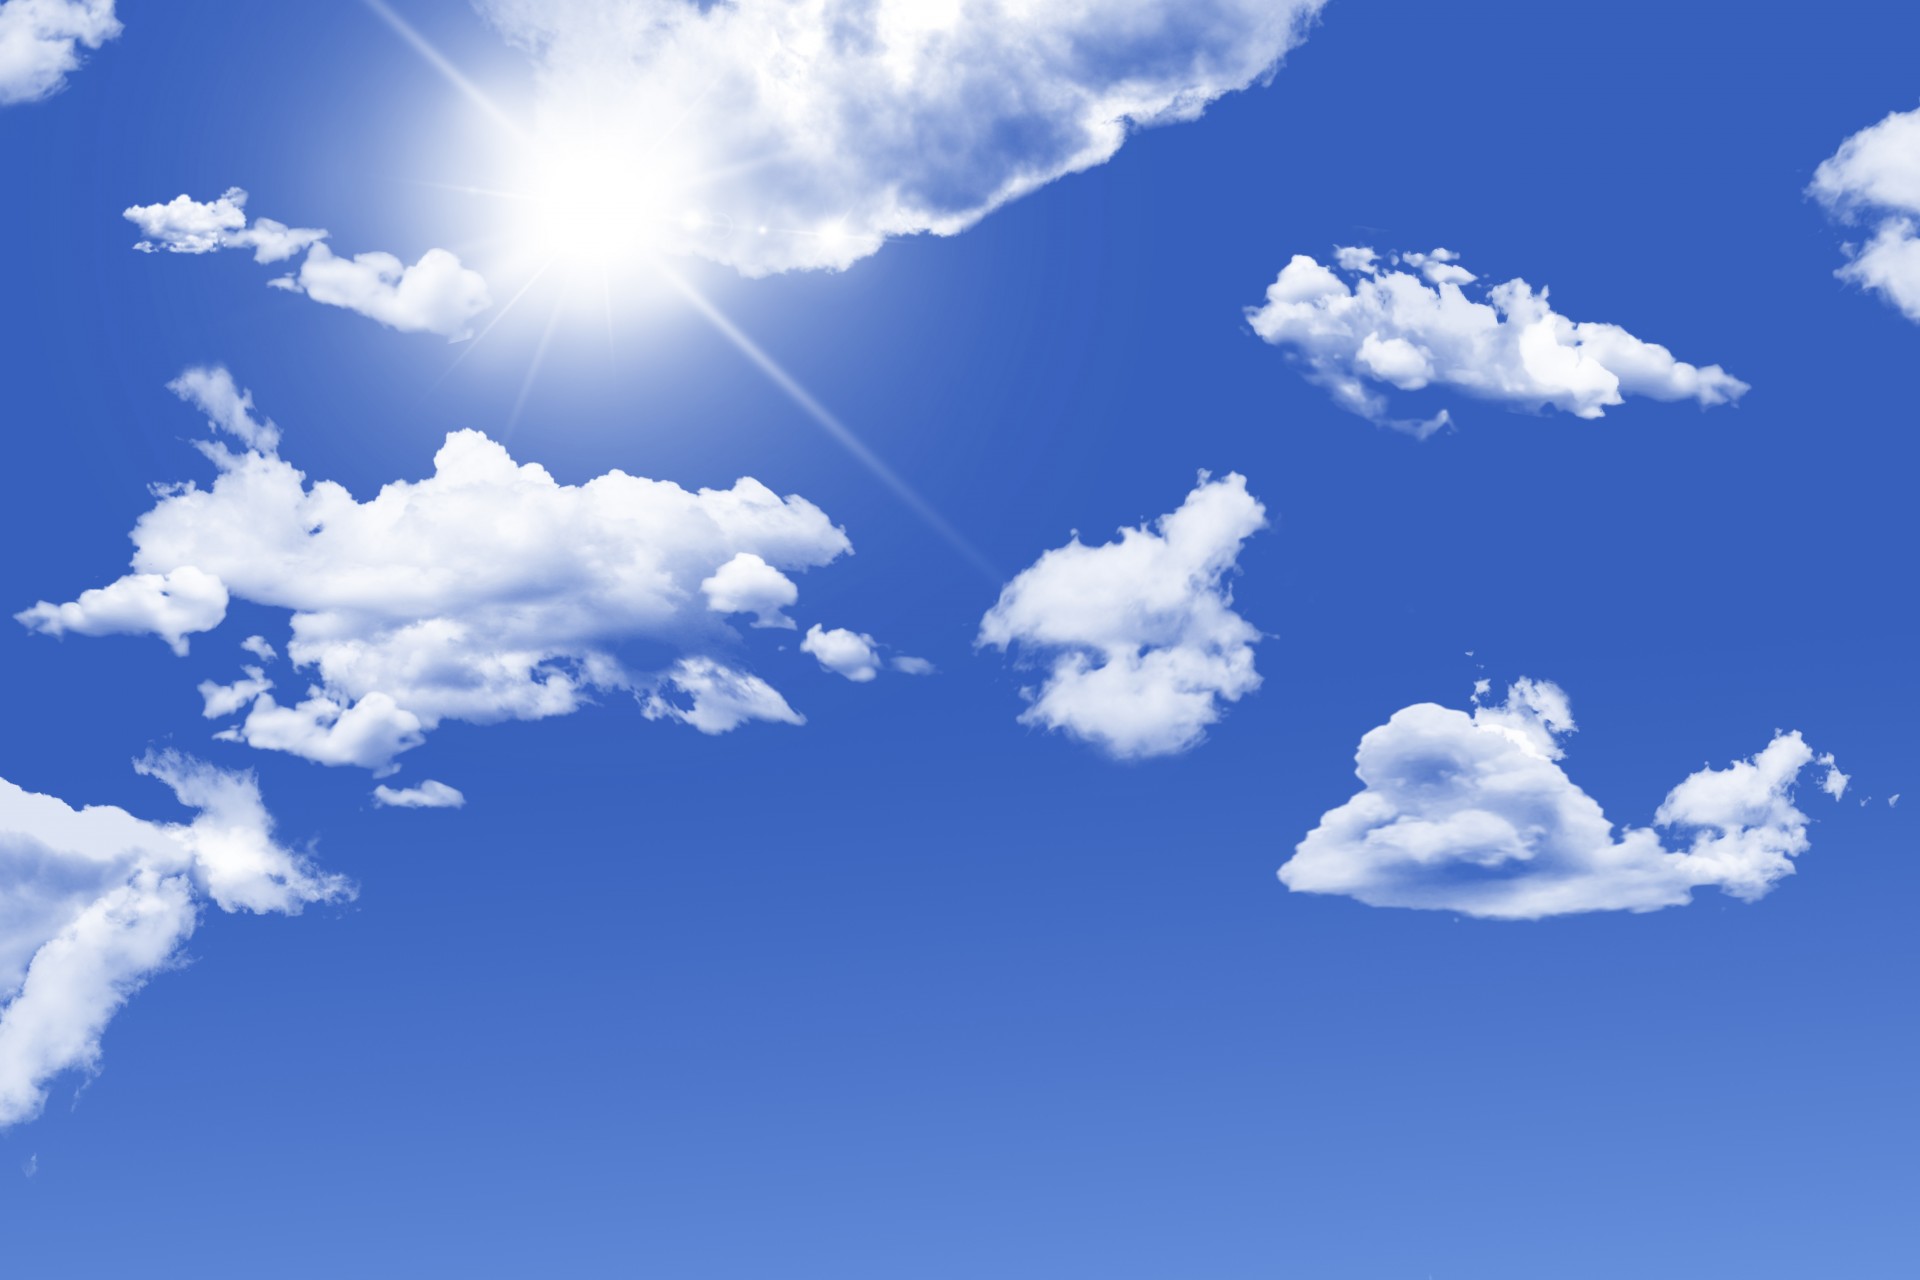 clouds-sun-sky-blue-background-free-image-from-needpix